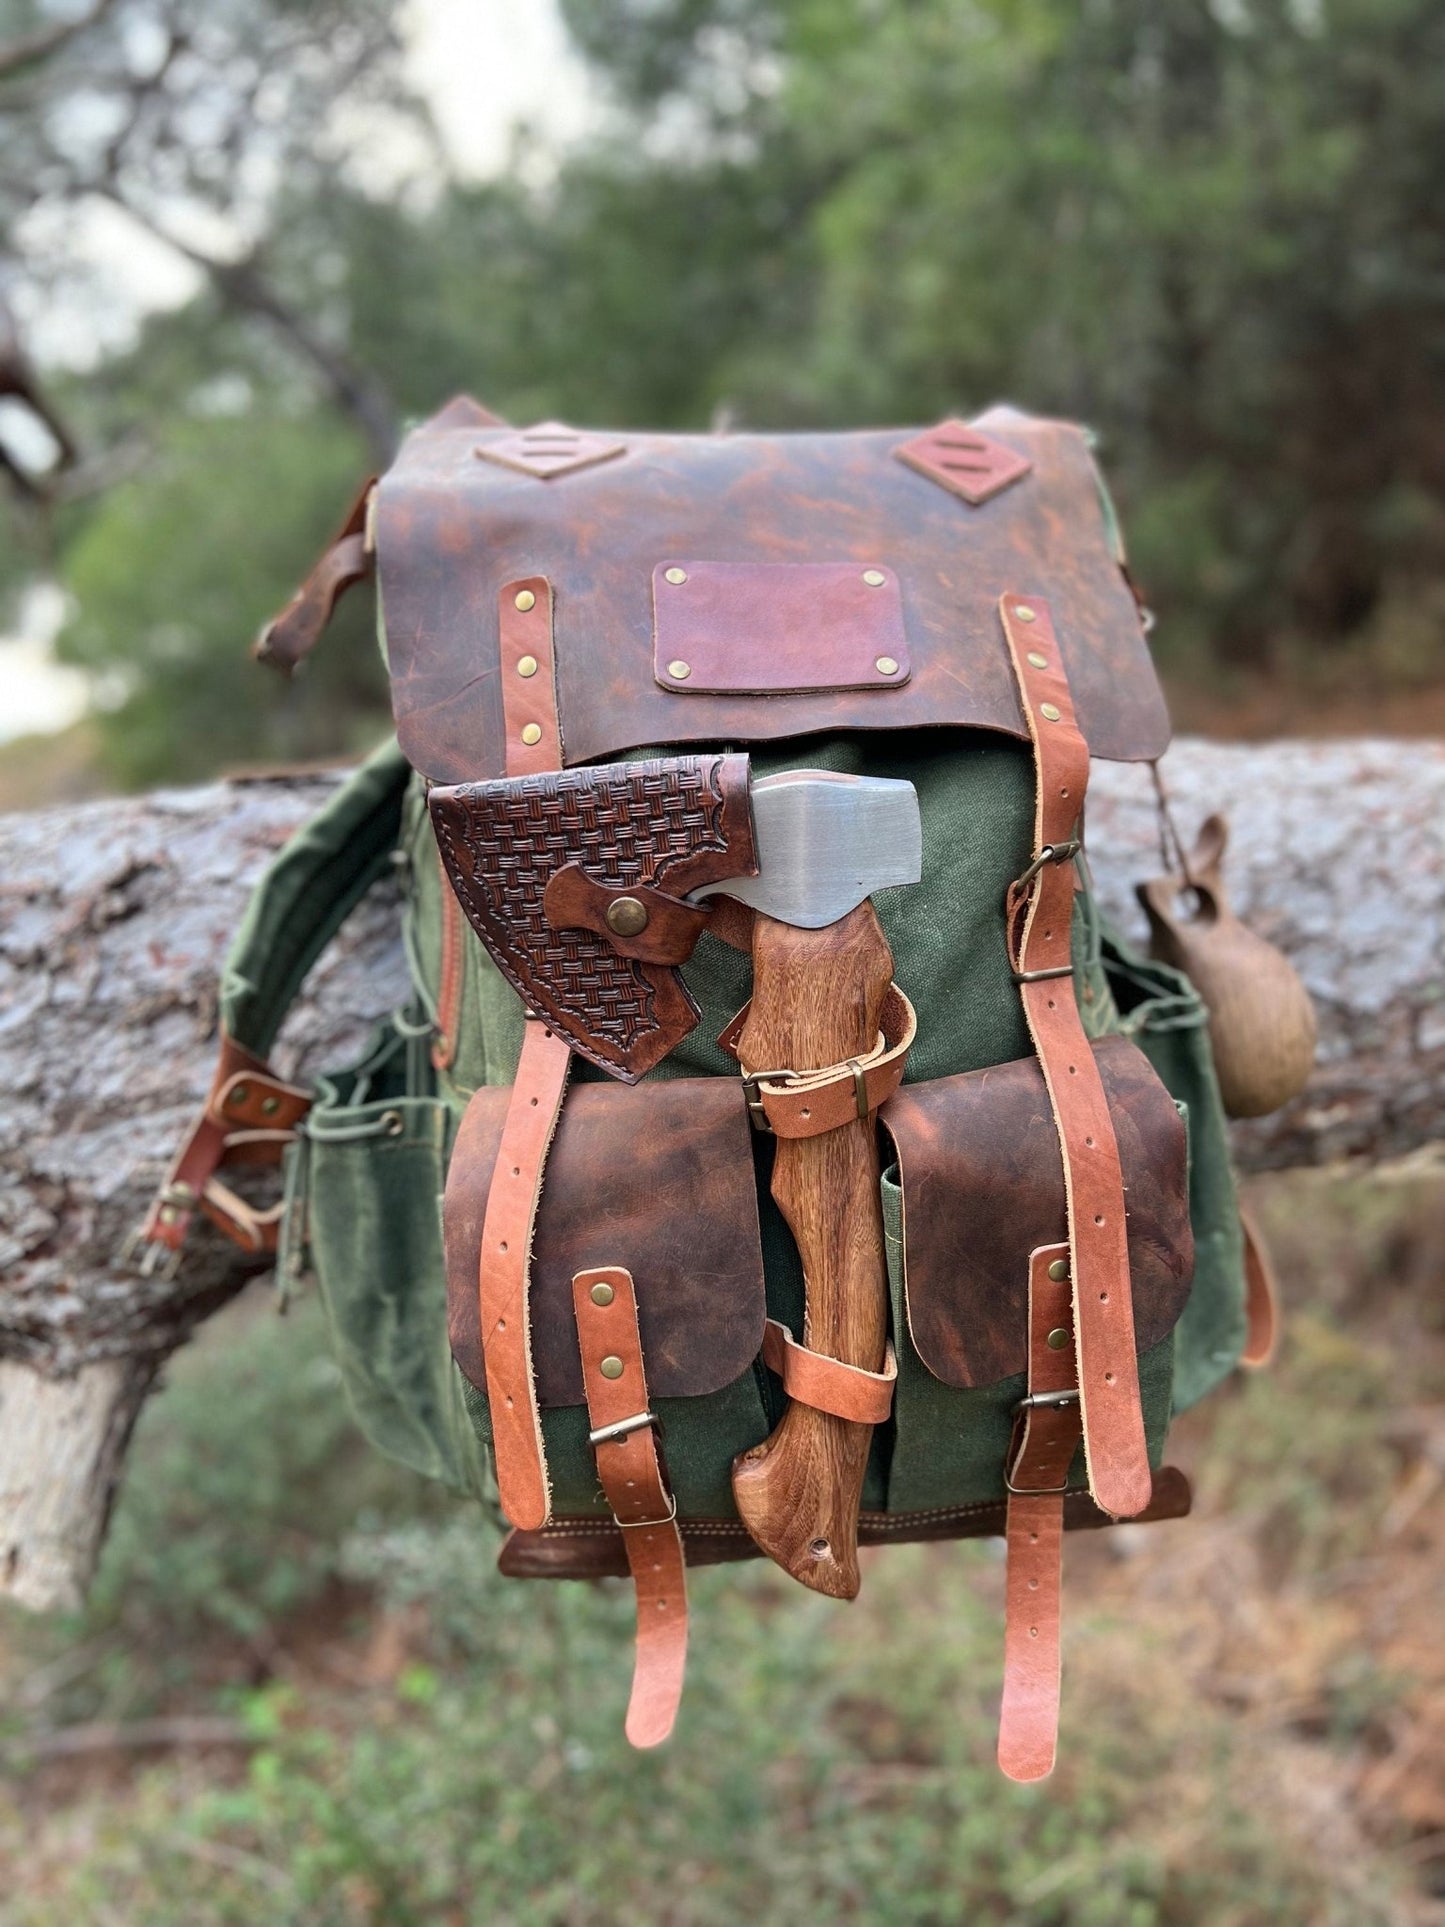 Handmade | Bushcraft Backpack | Camping Backpack| Leather | Waxed Canvas Backpack | Camping, Hunting, Bushcraft, Travel | Personalization  99percenthandmade   